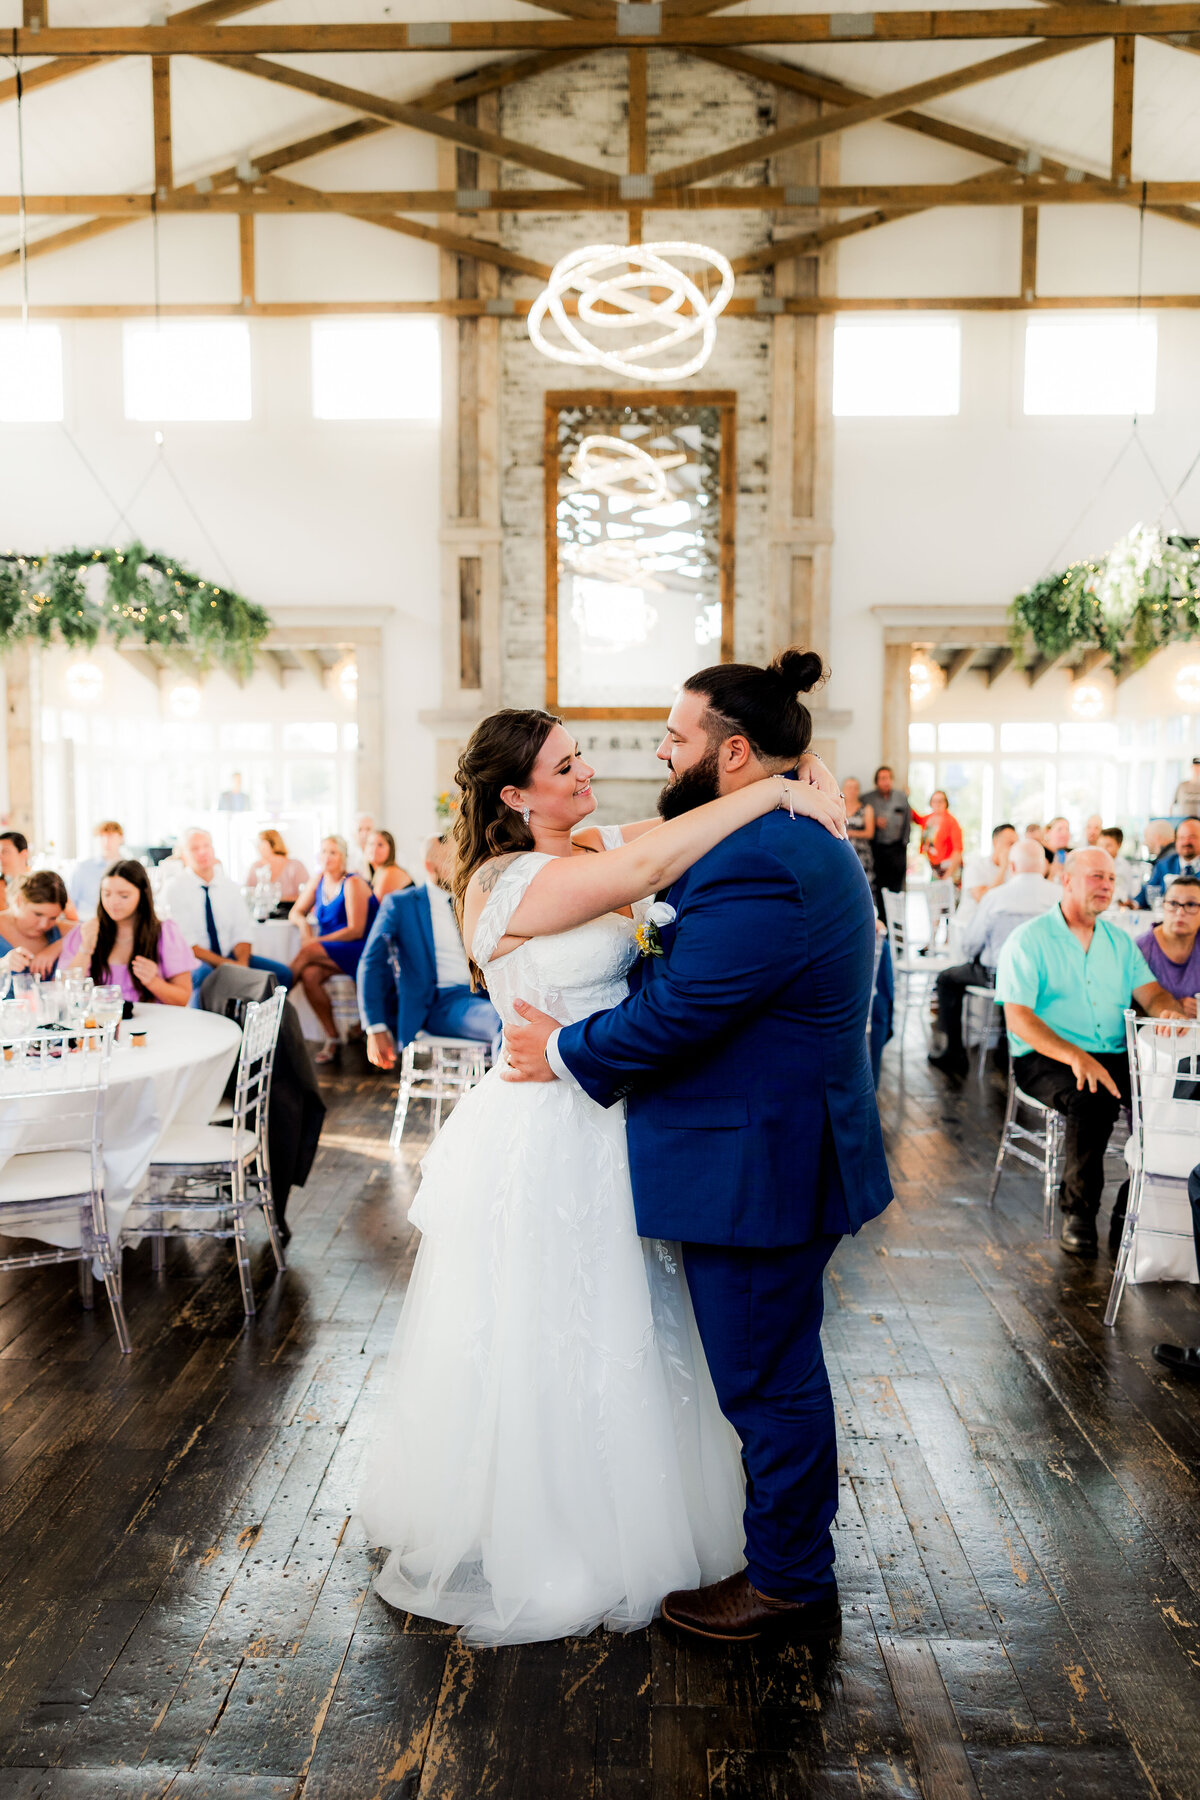 A couple share their first dance as husband and wife.